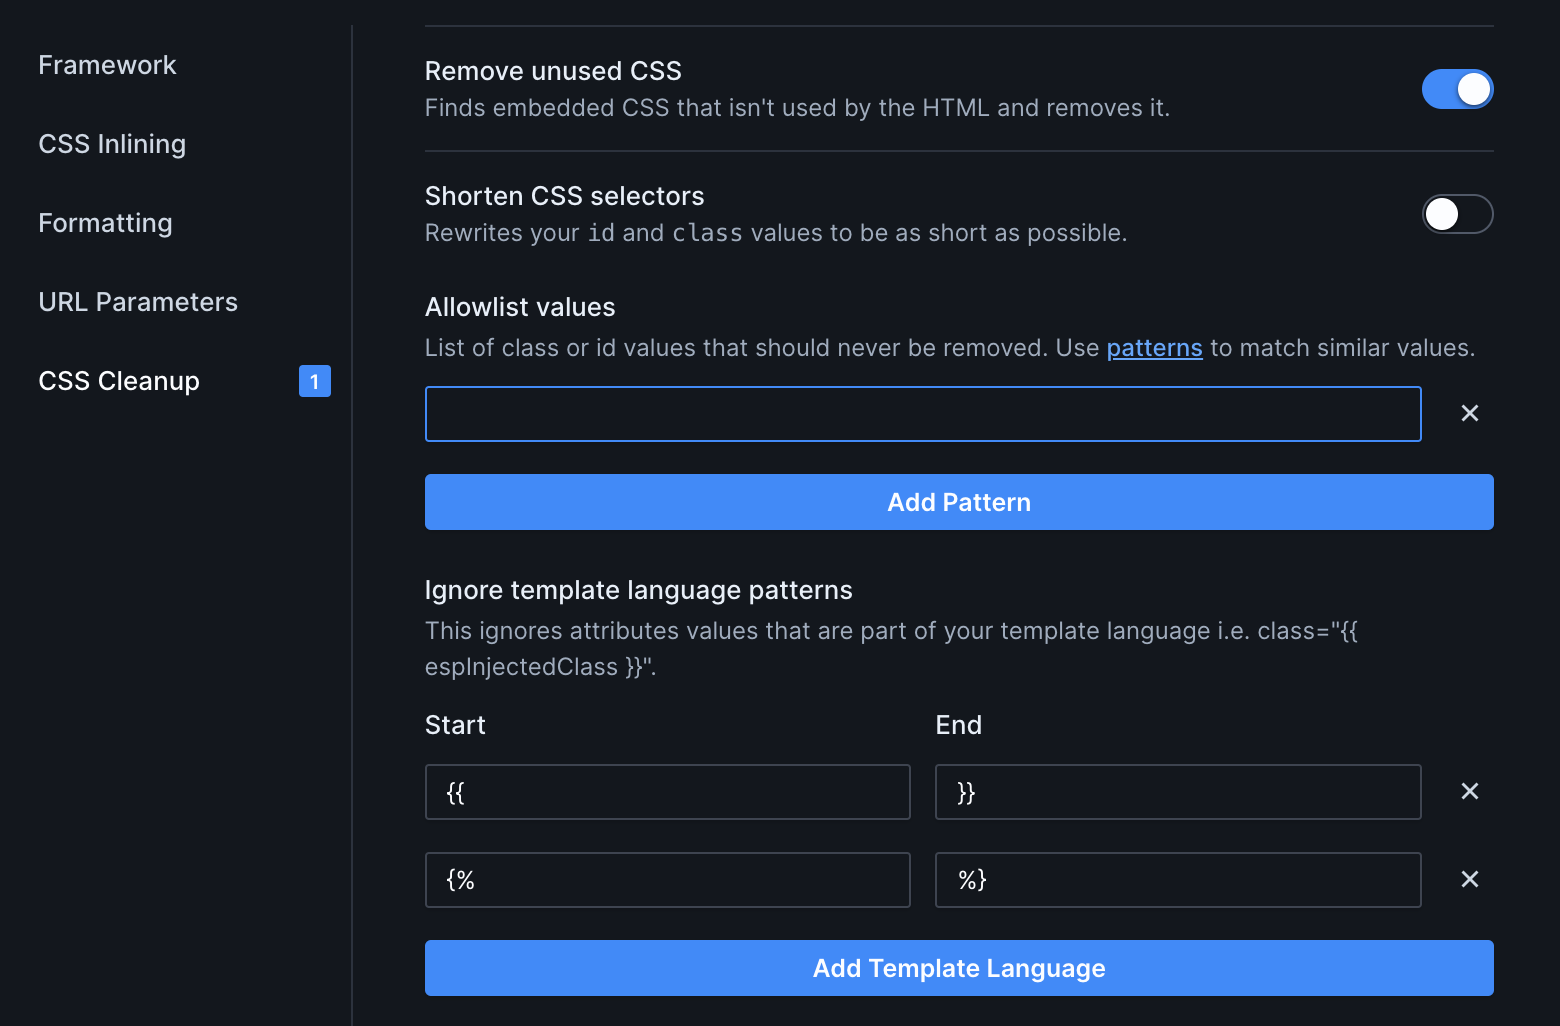 Up close image of the Transformers pane, with the CSS Cleanup section open. The "Remove unused CSS" toggle has been switched, revealing additional options. One of these options is "Allowlist values - List of class or id values that should never be removed. Use patterns to match similar values". Below is an editable text field, and a button labeled "Add Pattern".